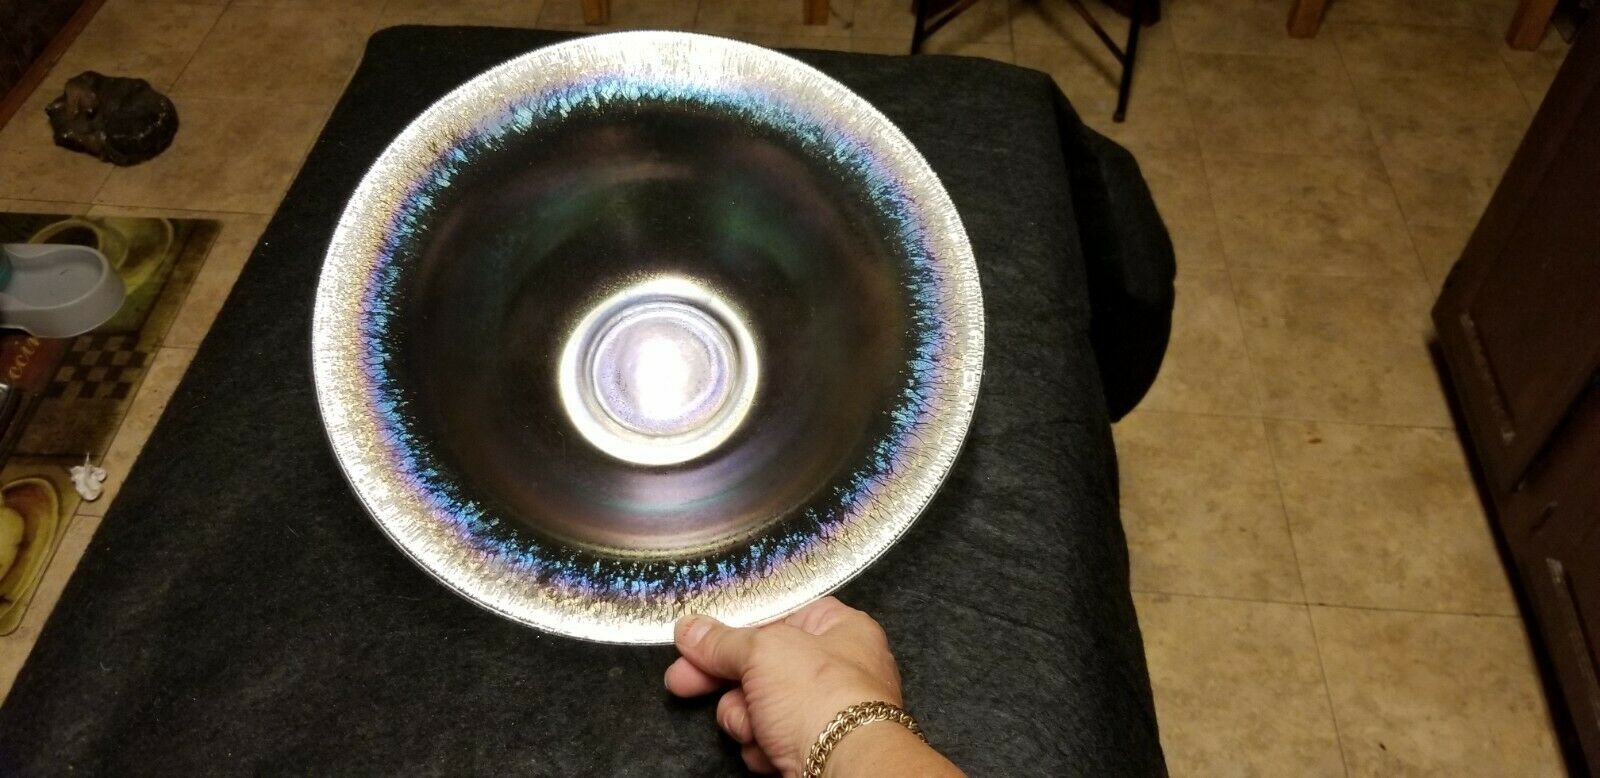 Vintage Favrile Onionskin Stretched Glass Iridescent Bowl Tiffany? Steuben? Wow